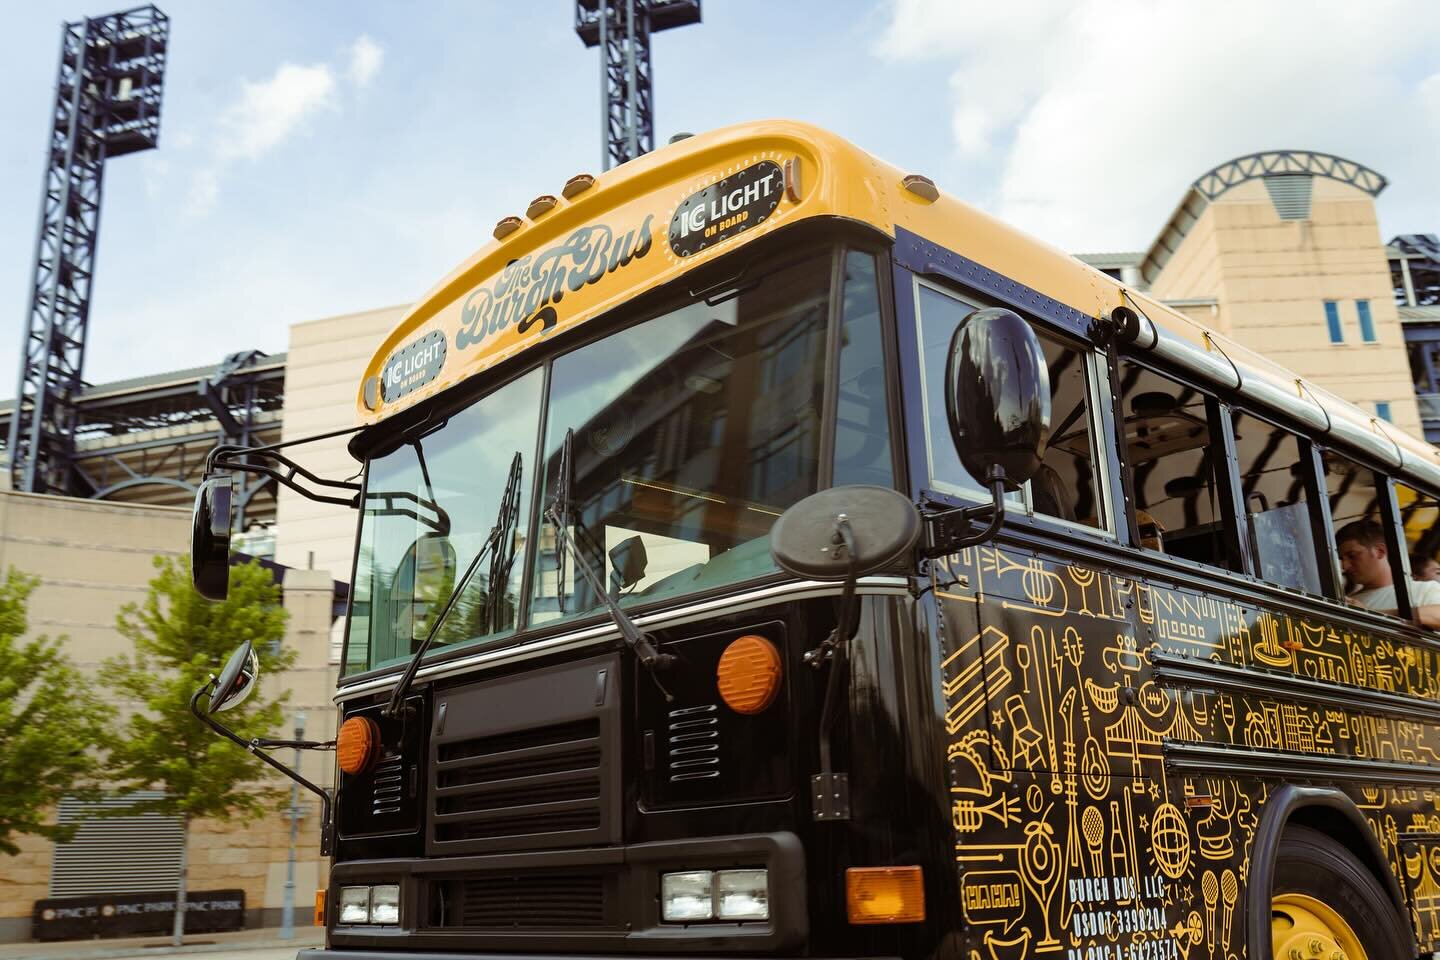 Tomorrow is Opening Day 🏴&zwj;☠️⚾️😎

We will be at the Block Party on Federal Street all afternoon. Come hang with @mattlightcomedy, snap a pic with the bus and get ready to welcome baseball back in the Burgh!

#letsgobucs #pittsburgh #pittsburghpi